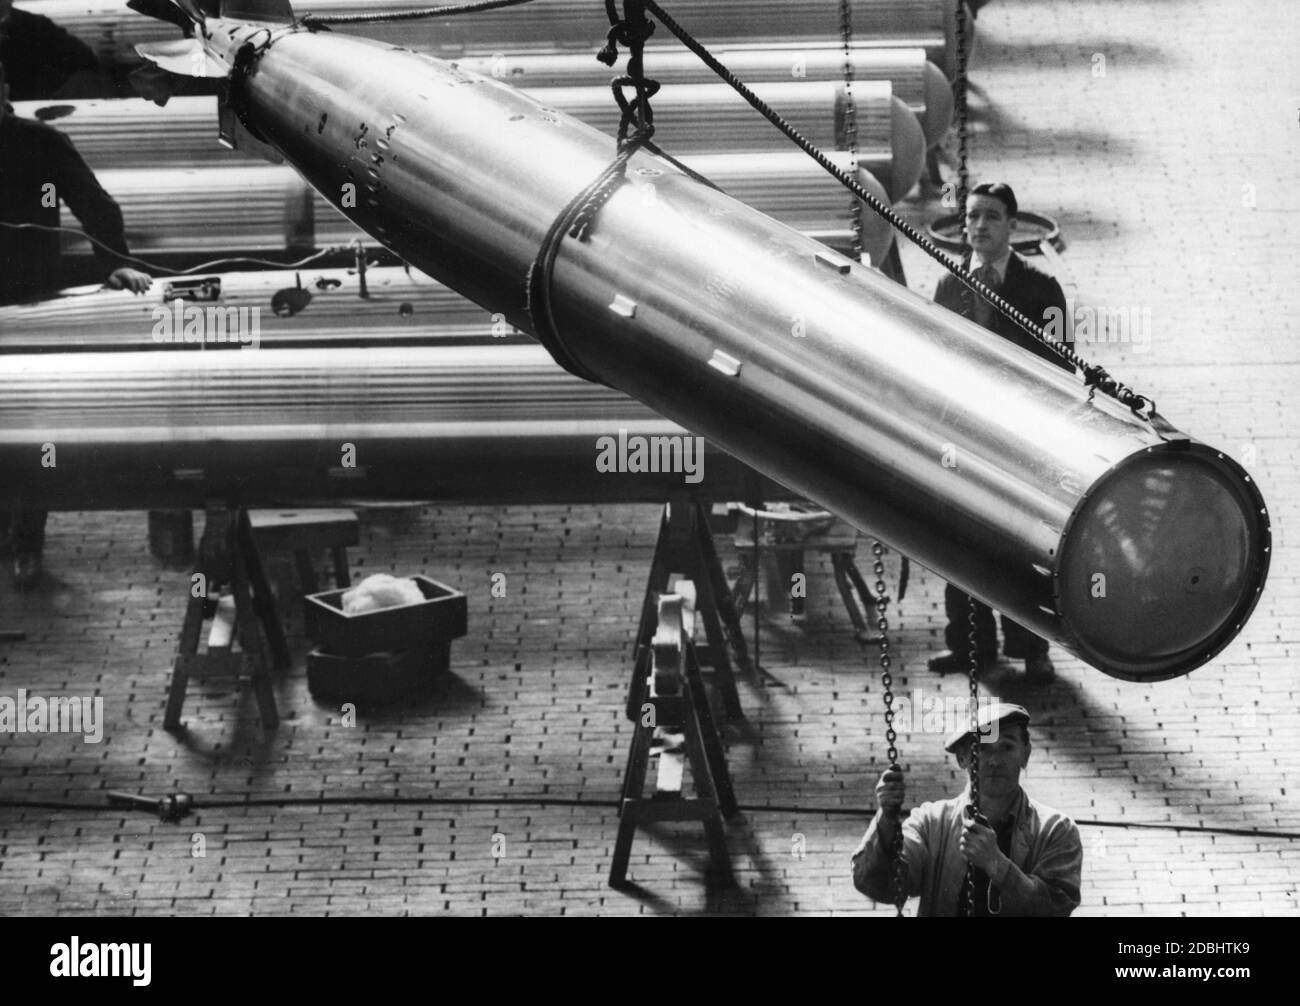 Worker involved in the production of torpedoes in a British armaments factory. Stock Photo